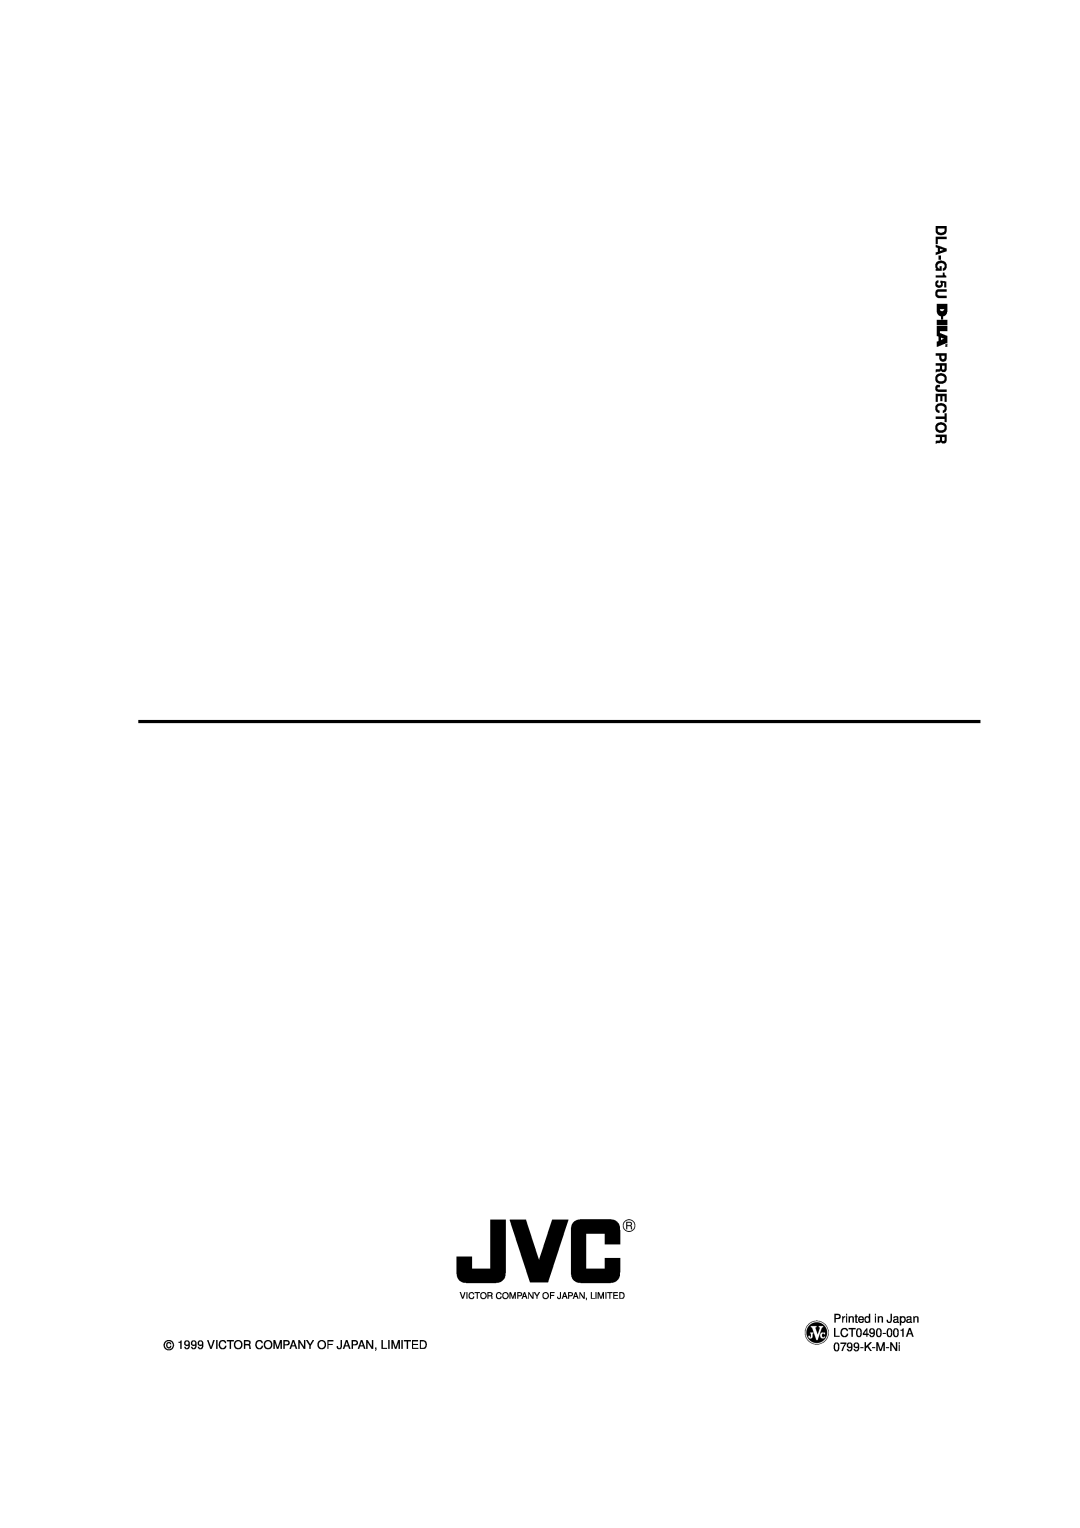 JVC manual DLA-G15U PROJECTOR, Printed in Japan, Victor Company Of Japan, Limited, LCT0490-001A, K-M-Ni 